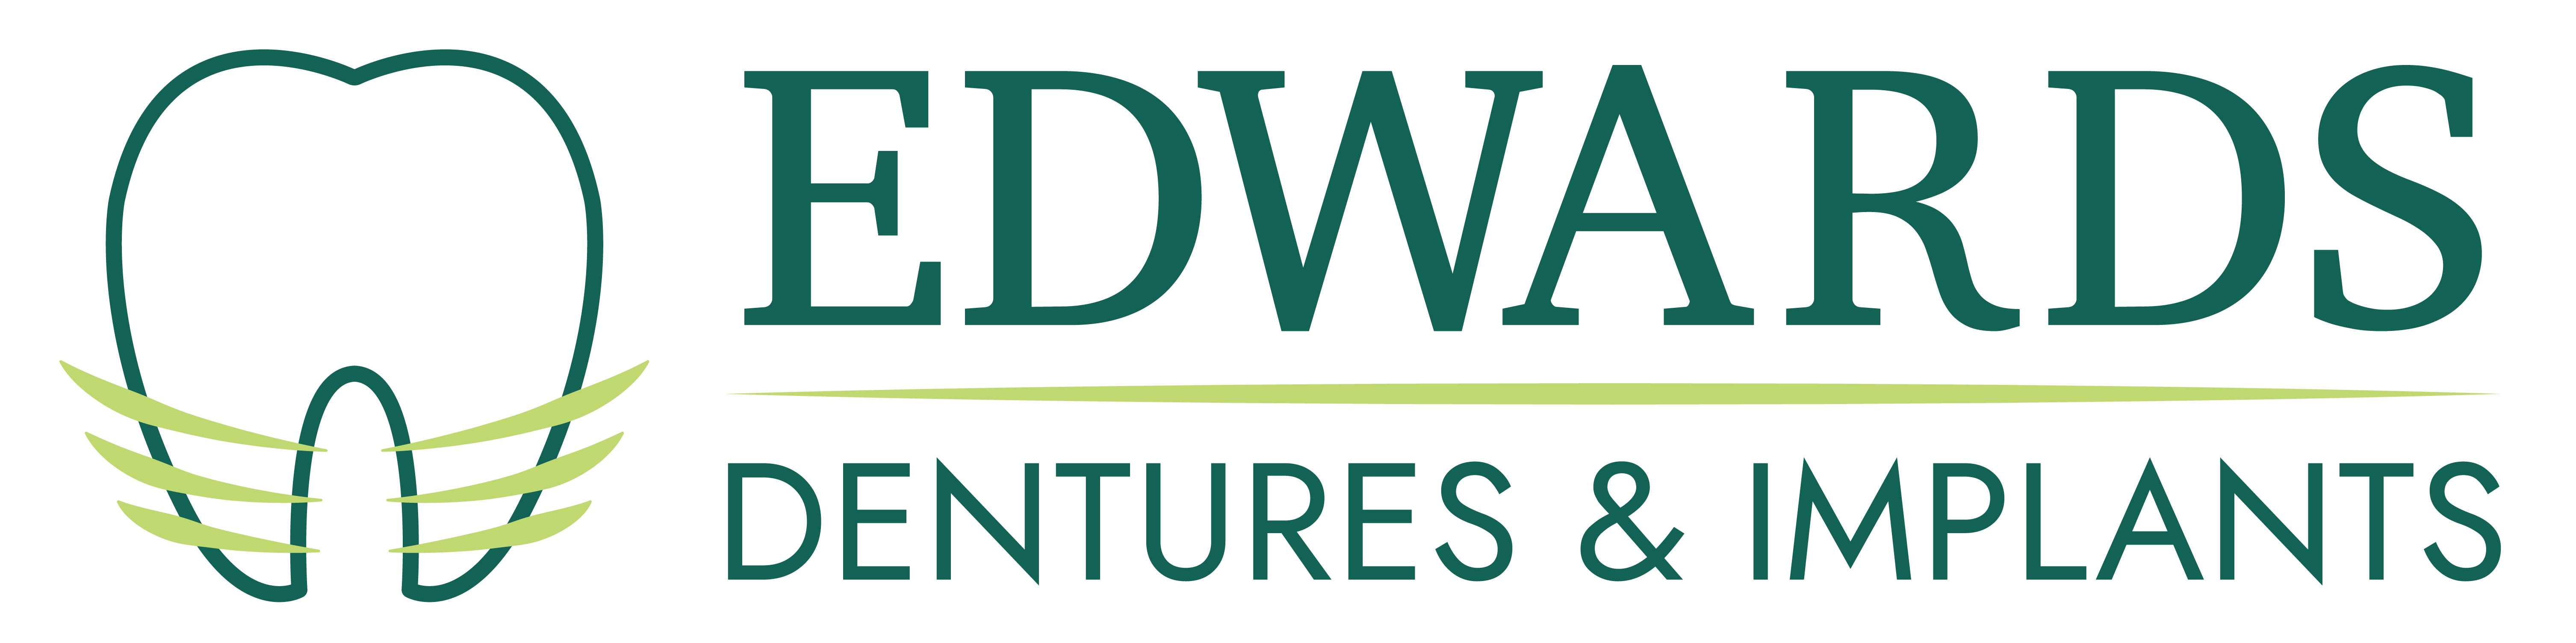 Edwards Dentures and Implants